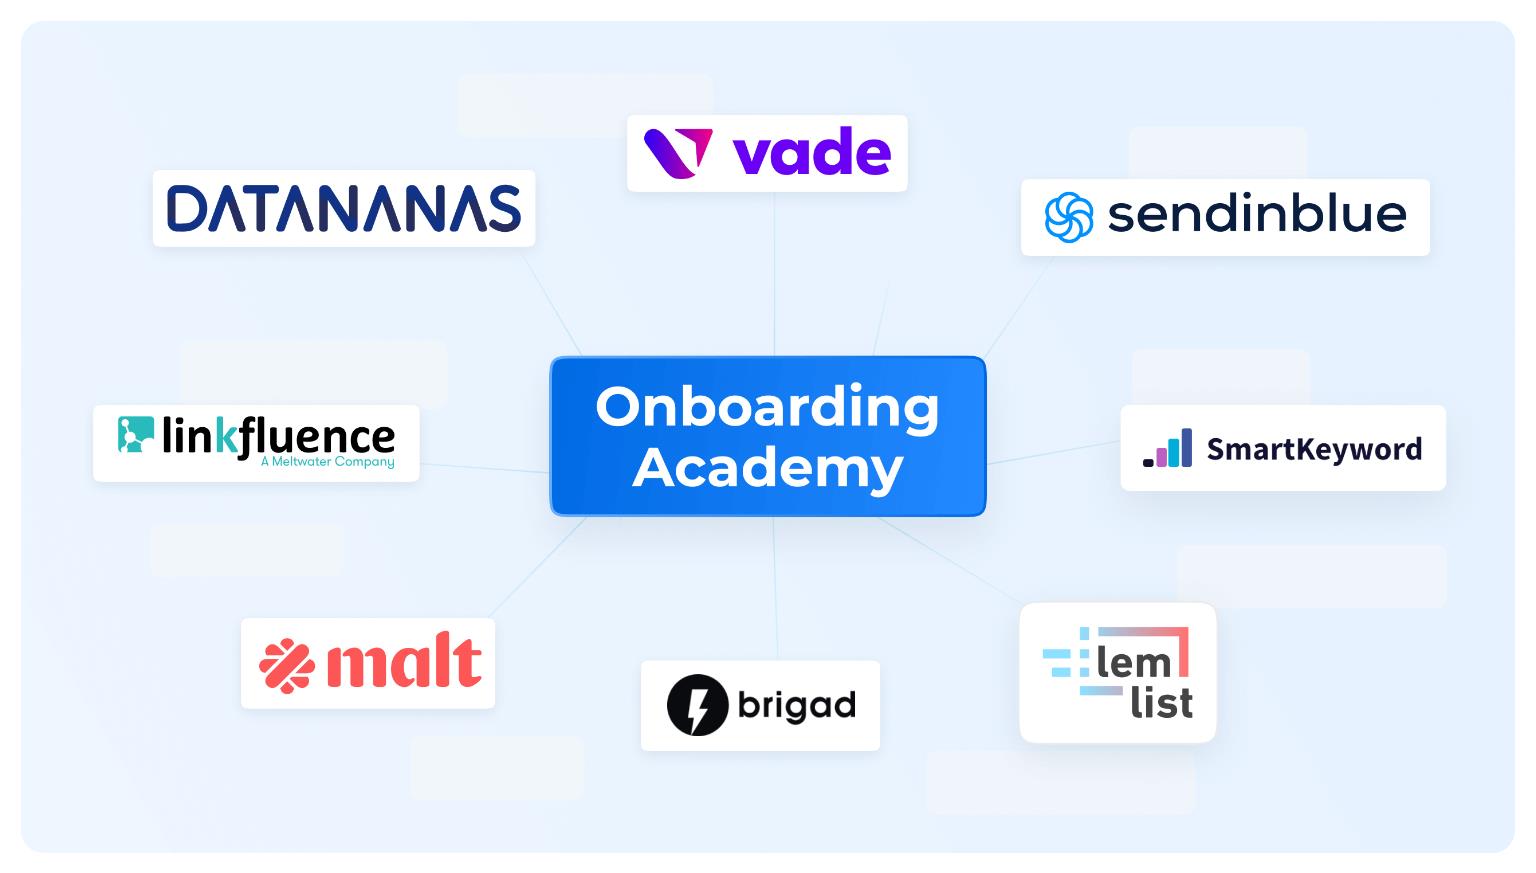 French SaaS companies and their academies